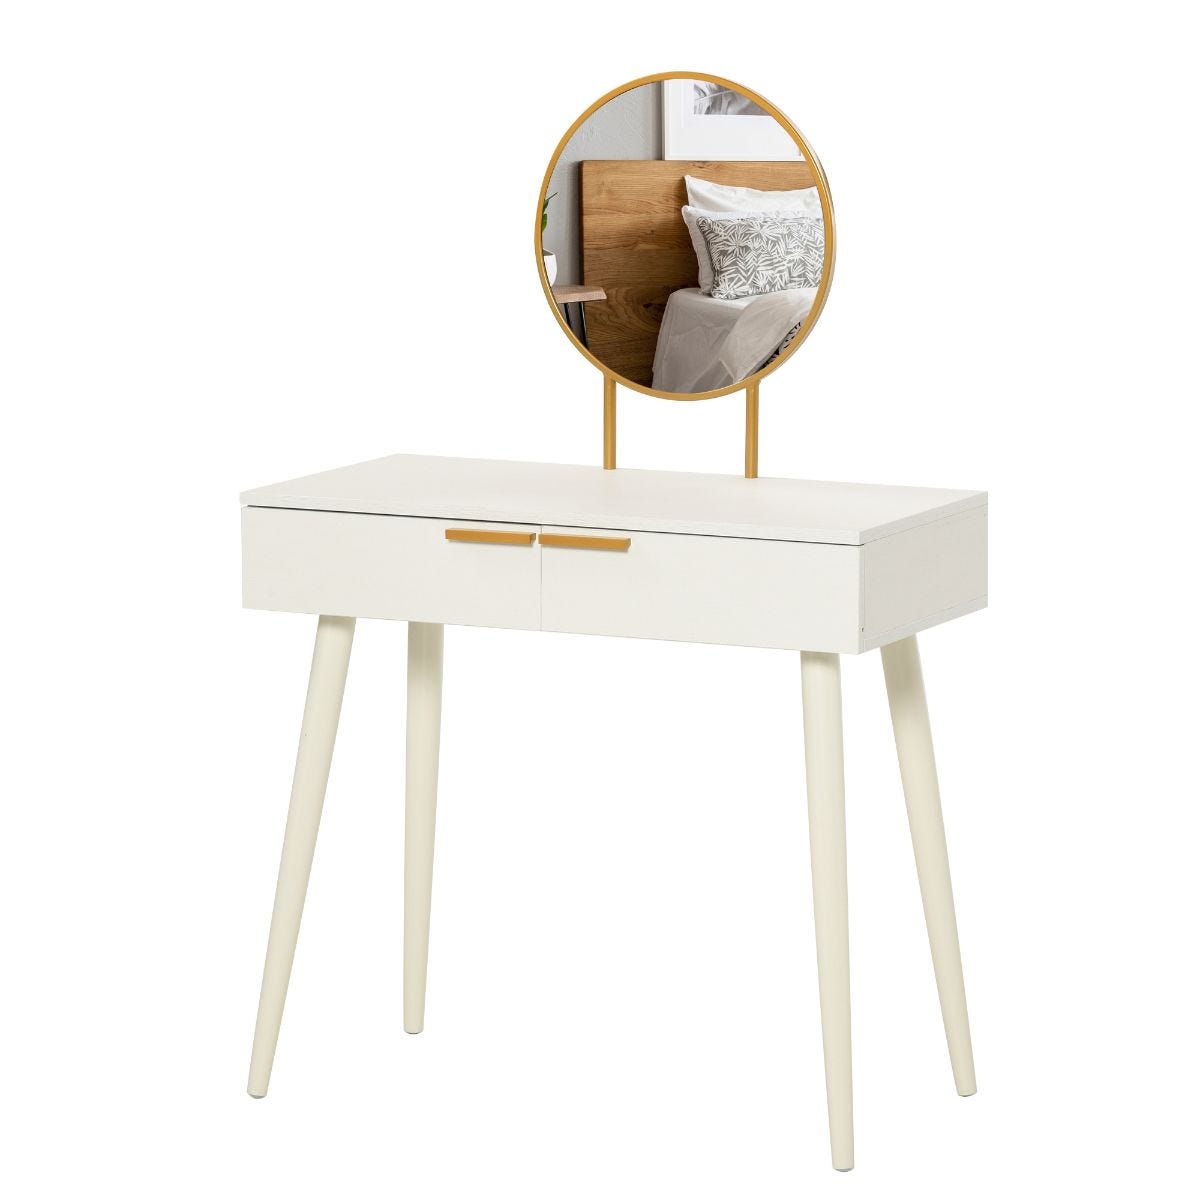 Homcom Retro Style Dressing Table With 2 Drawers Round Mirror Hairpin Legs White Wood Grain